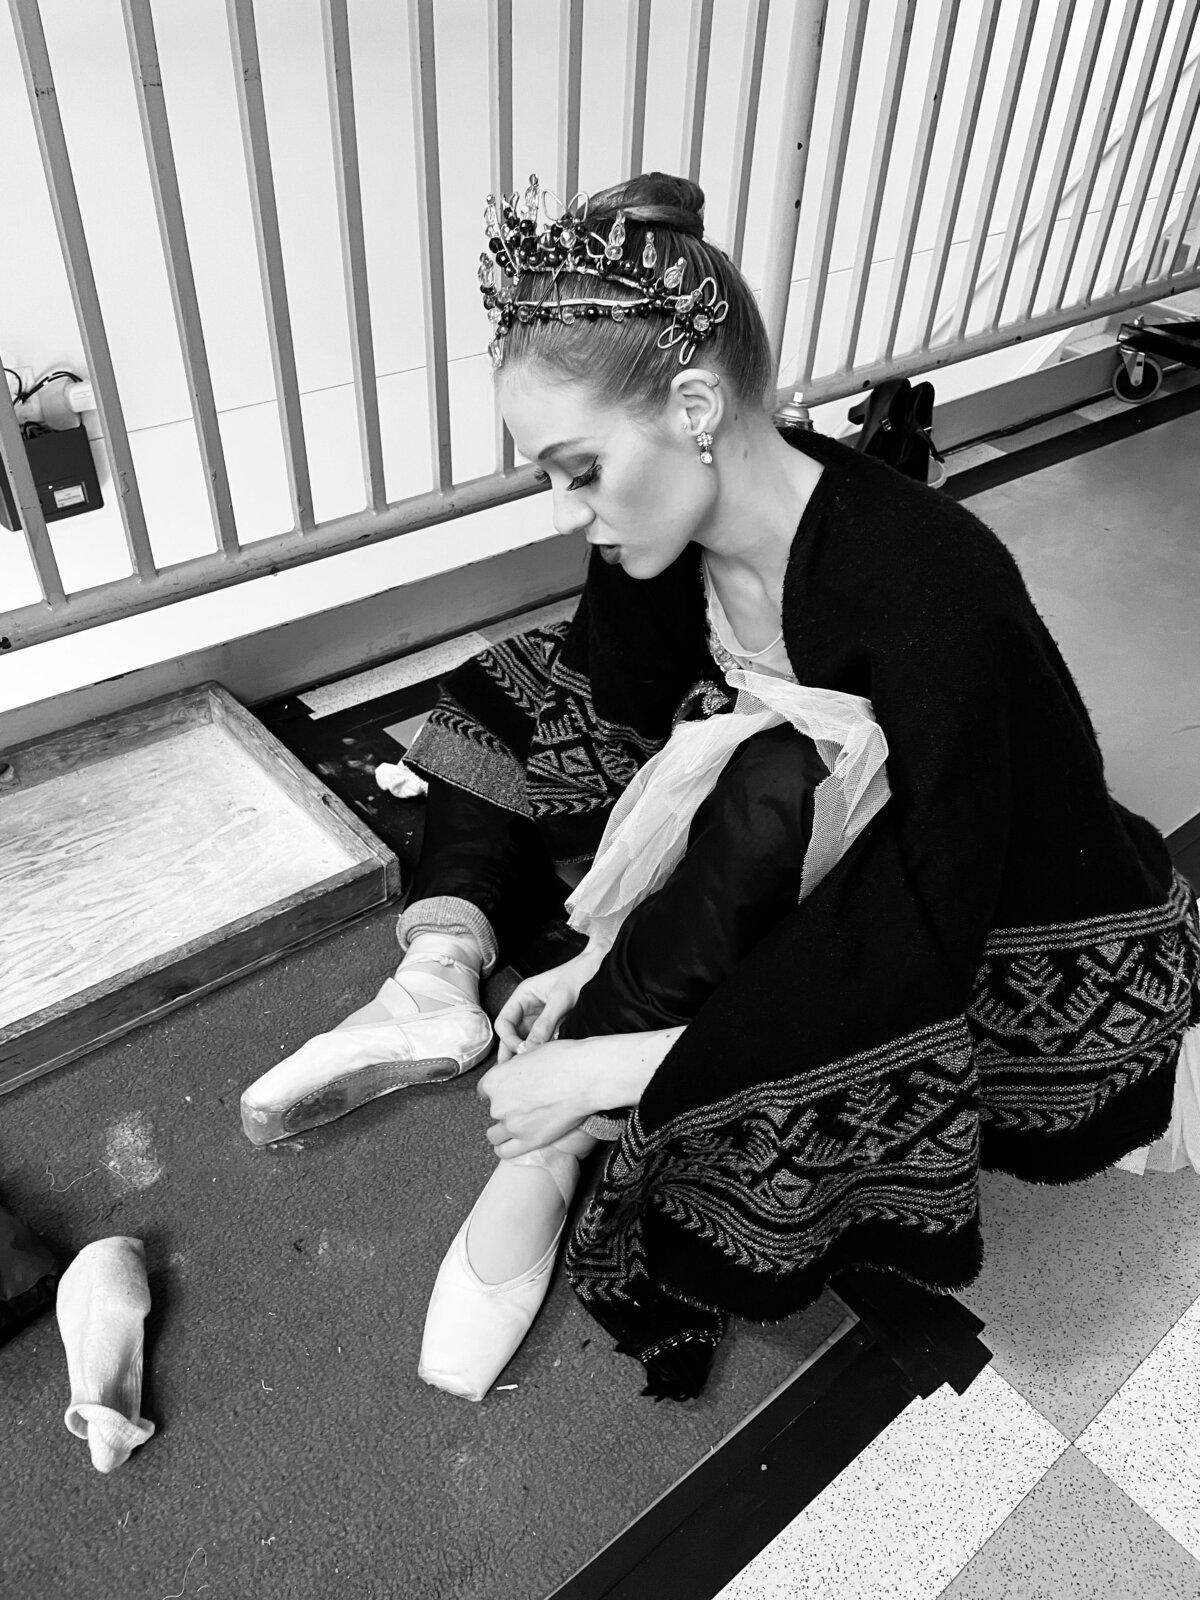 Ms. Nyman ties her pointe shoes before performing as the Sugar Plum Fairy in “The Nutcracker.” (Katelyn Rhodes)